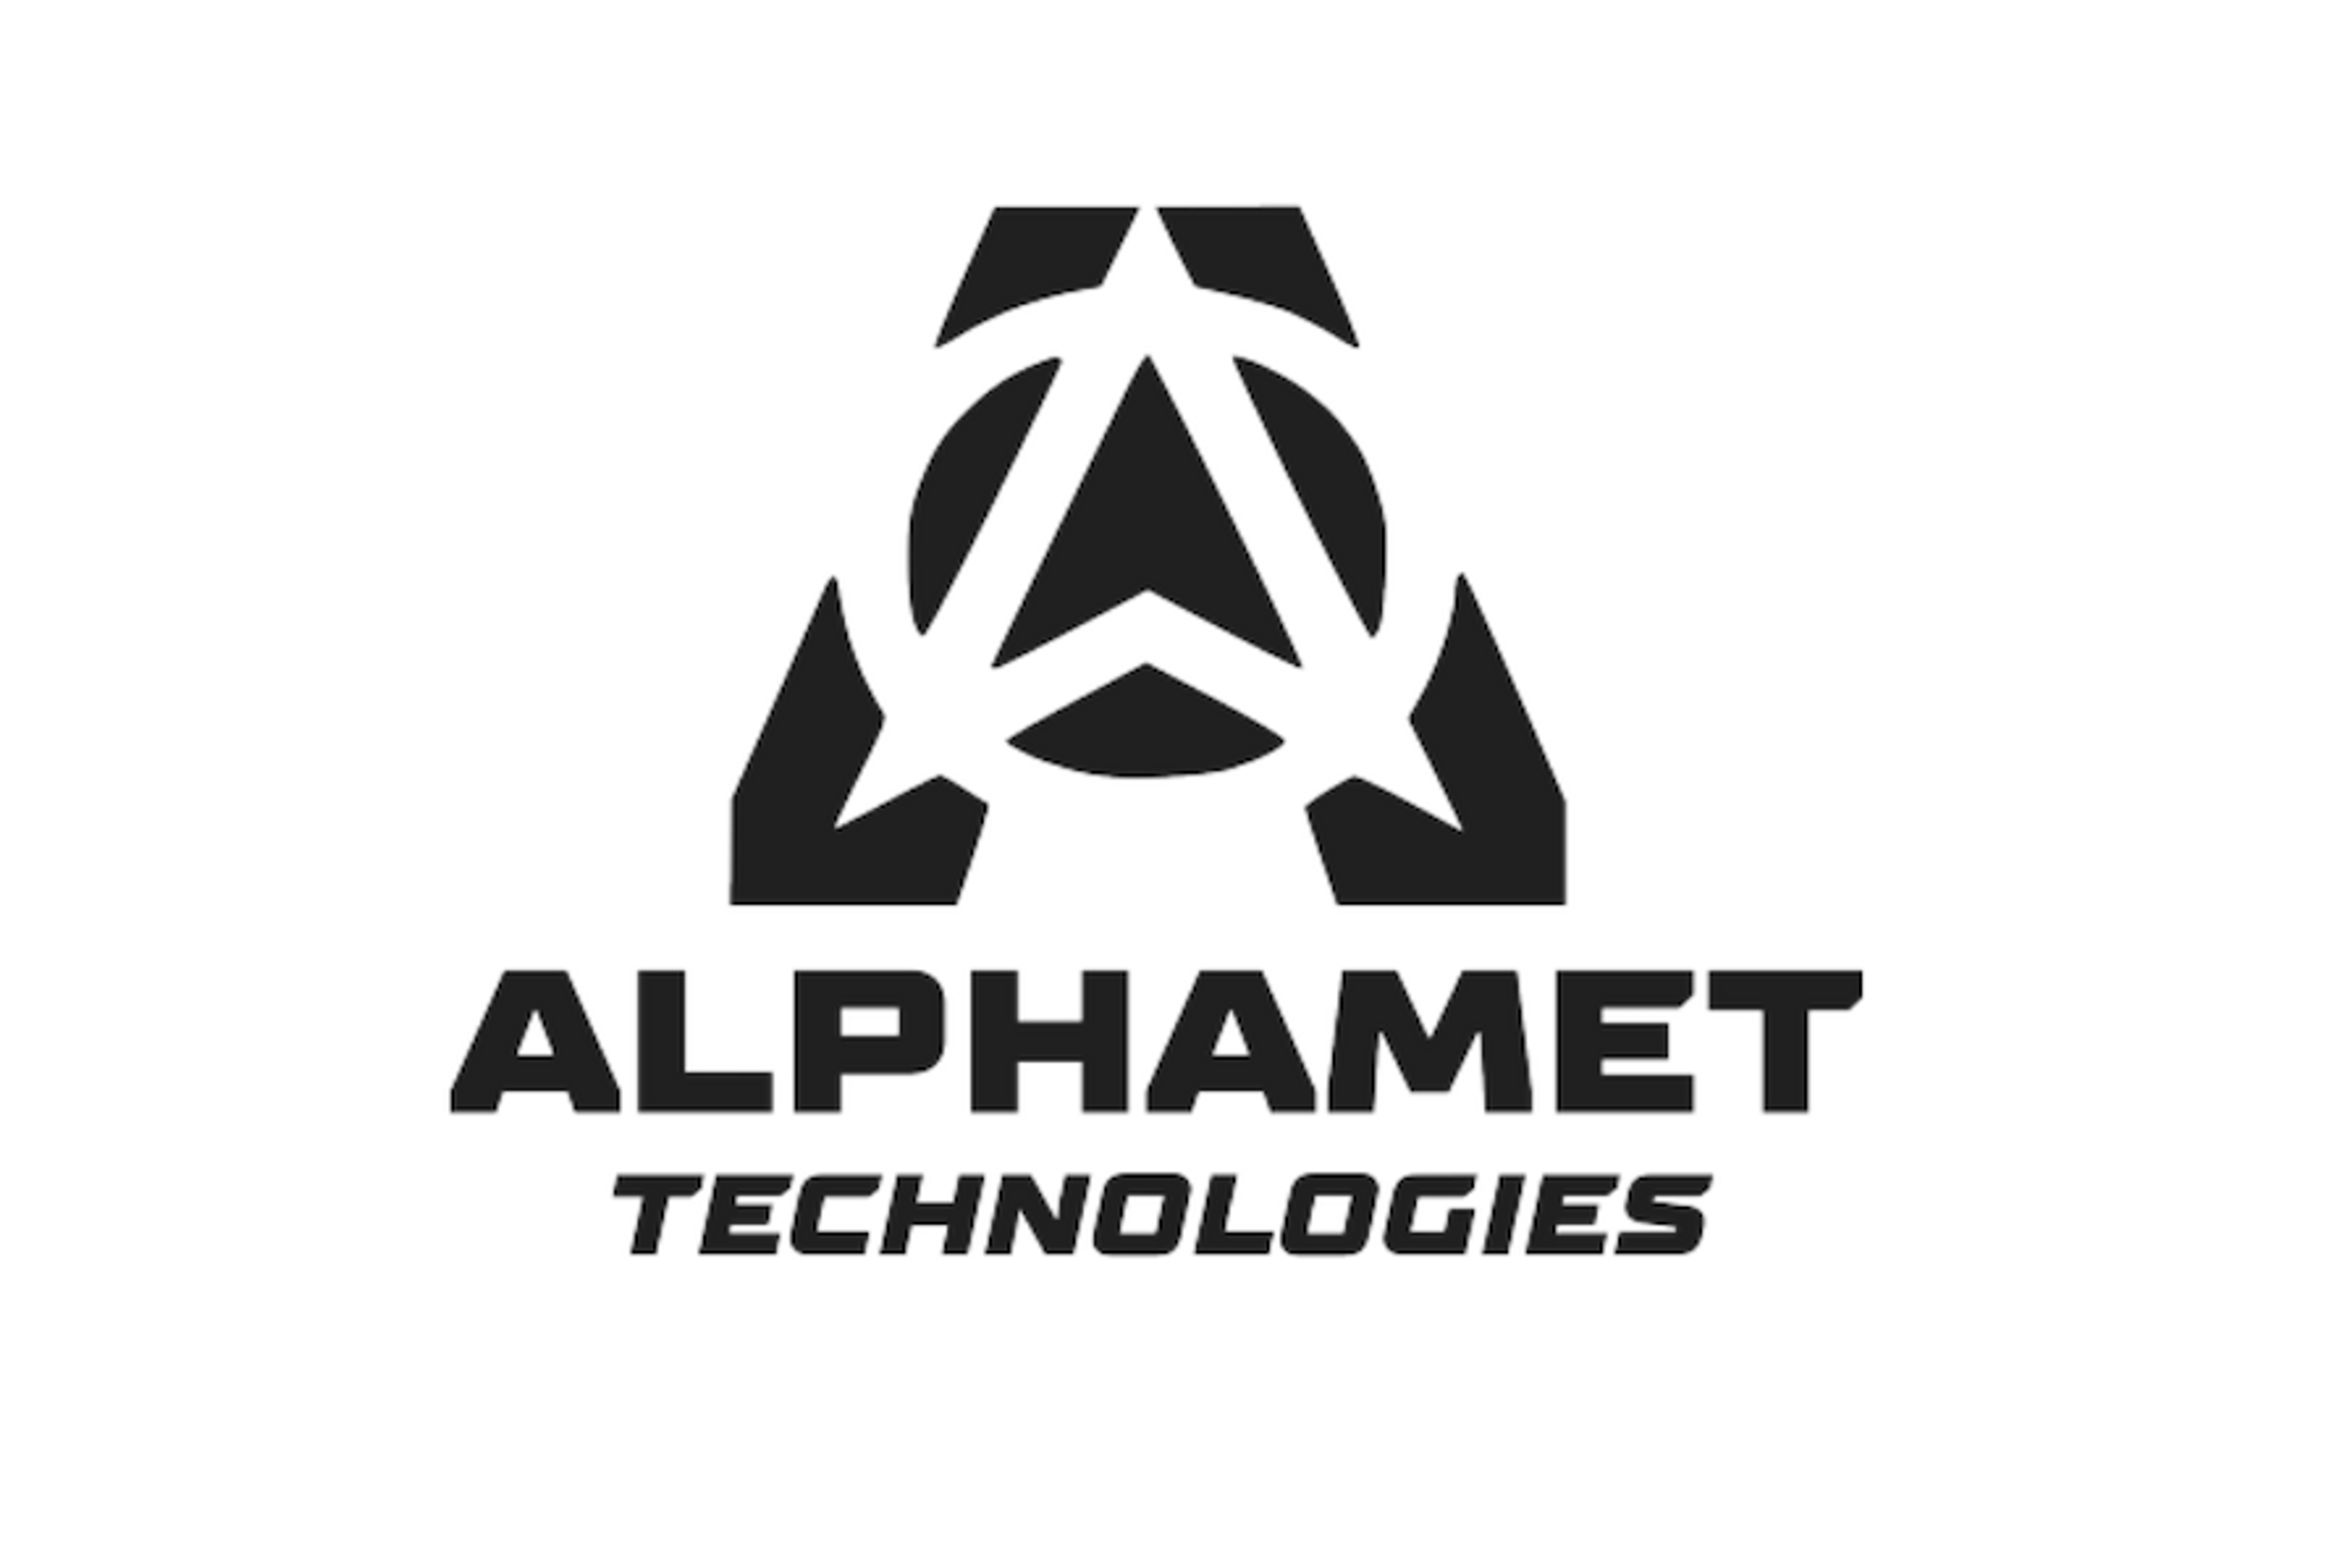 Alpha Metaverse Technologies Announces Entry into Play-to-Earn Gaming; Partnership with BetU ICO Corp